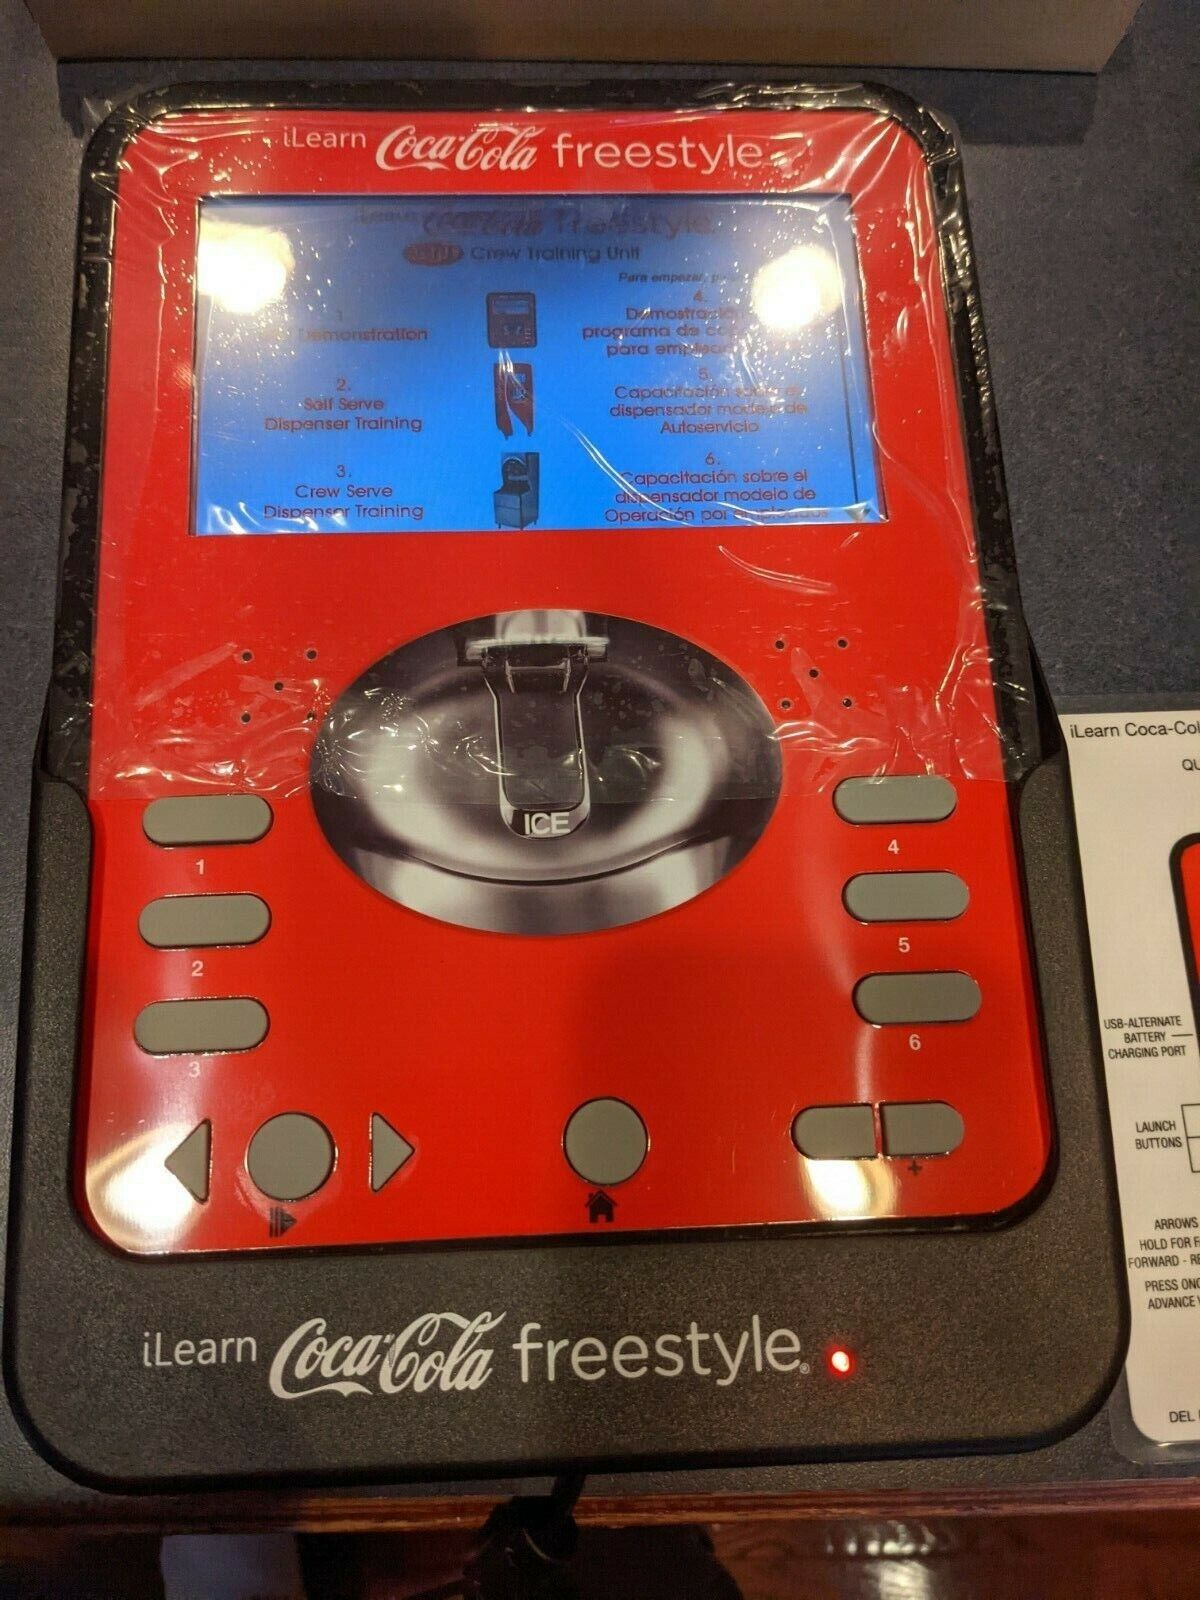 Coke Coca -Cola Freestyle Crew Training Unit I-Learn Interactive Tablet Complete